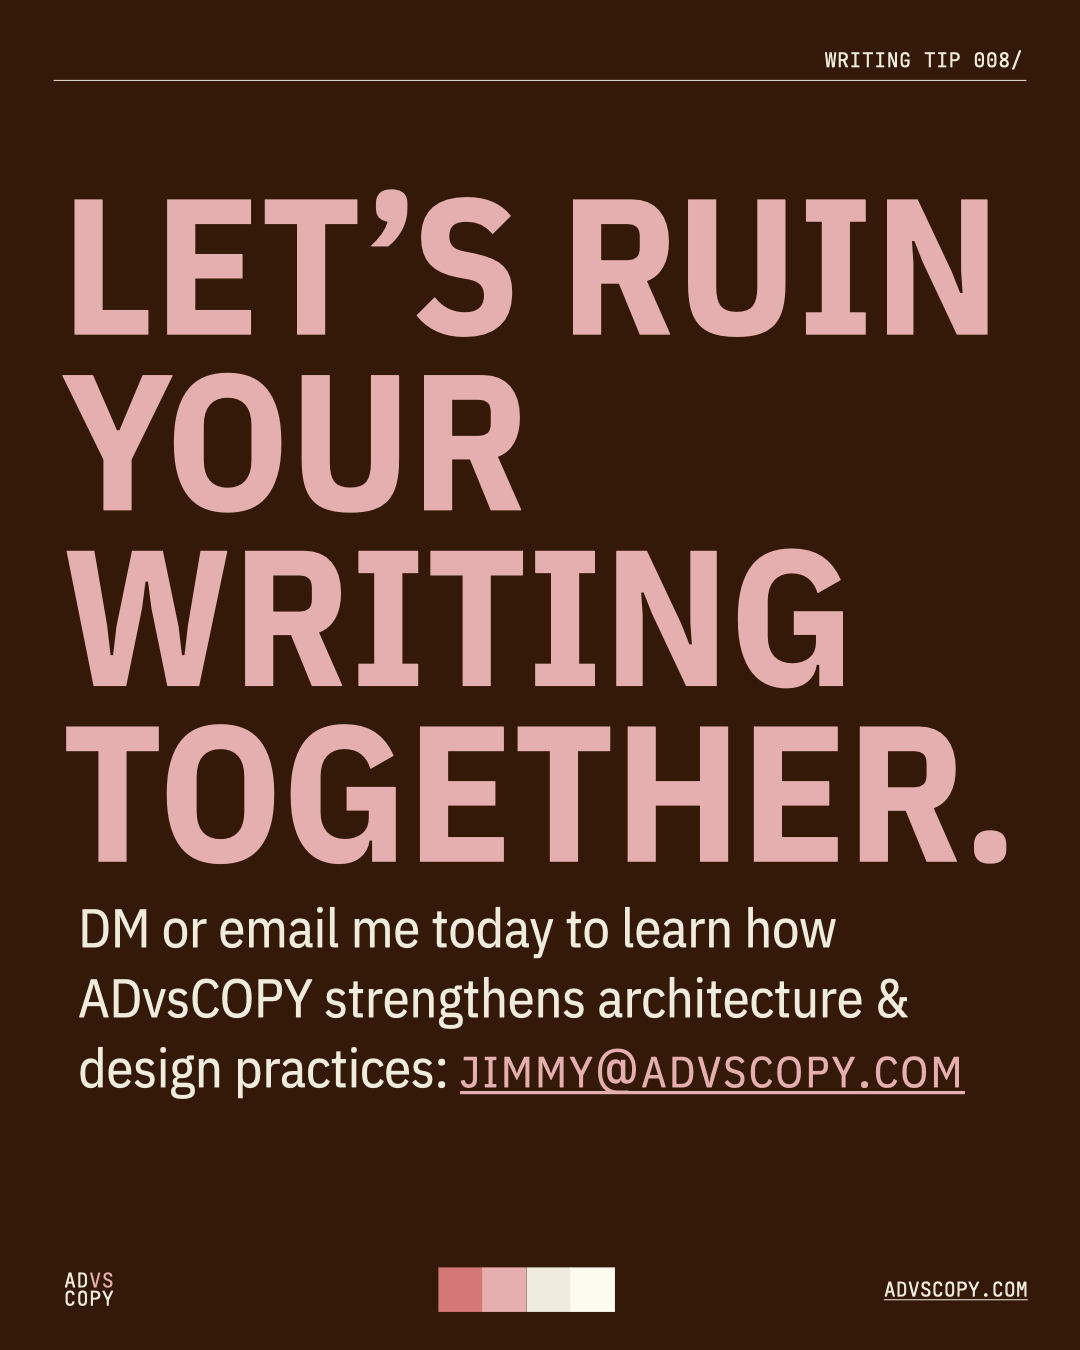 Ruin your writing.010.001.png